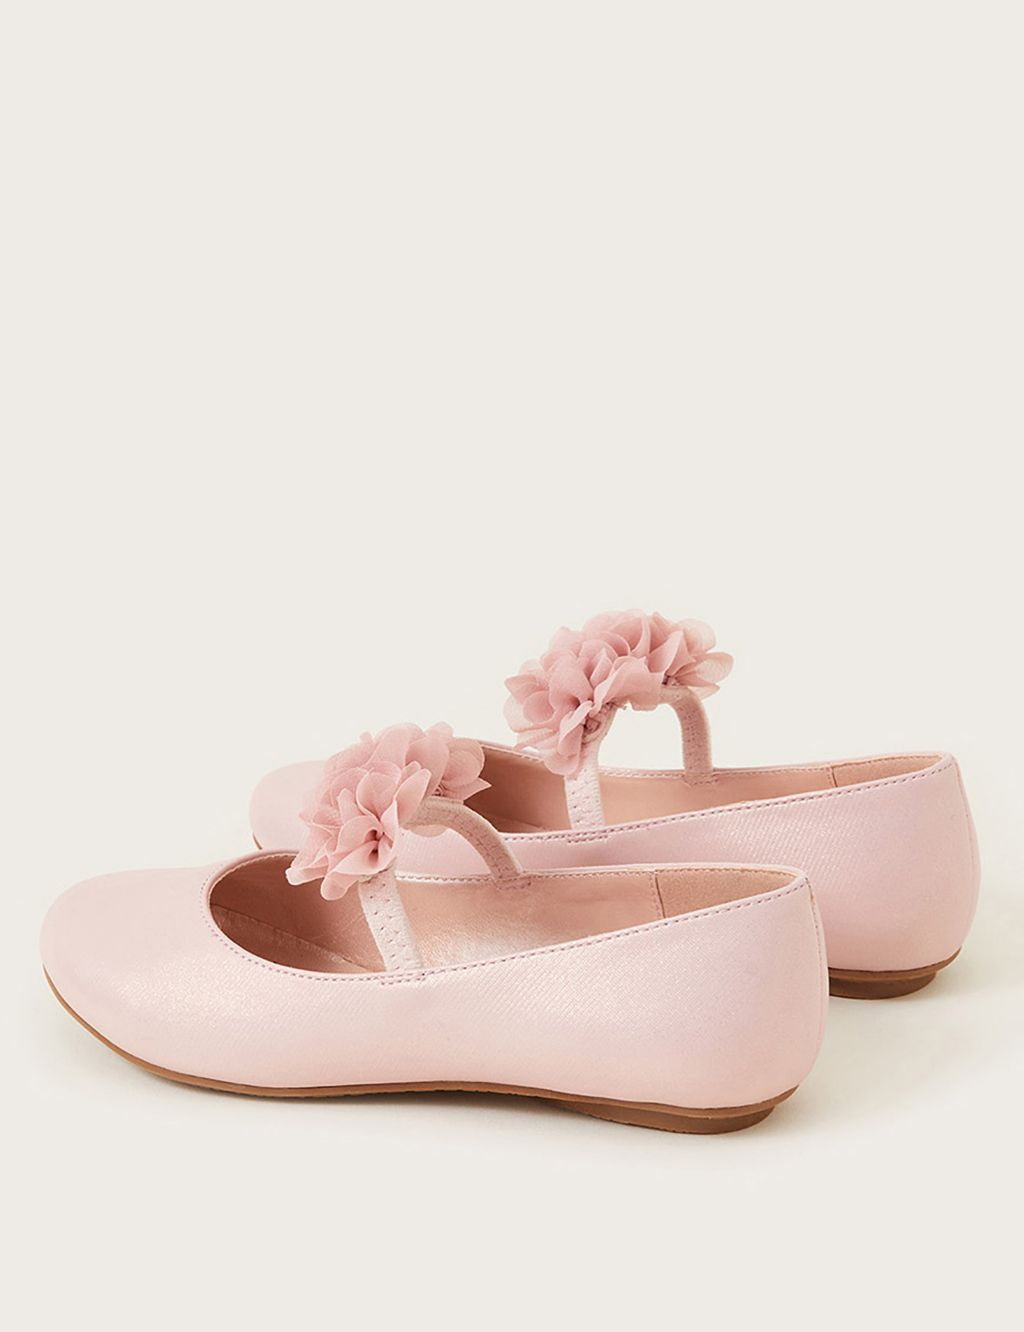 Kids' Floral Ballerina Party Shoes image 3